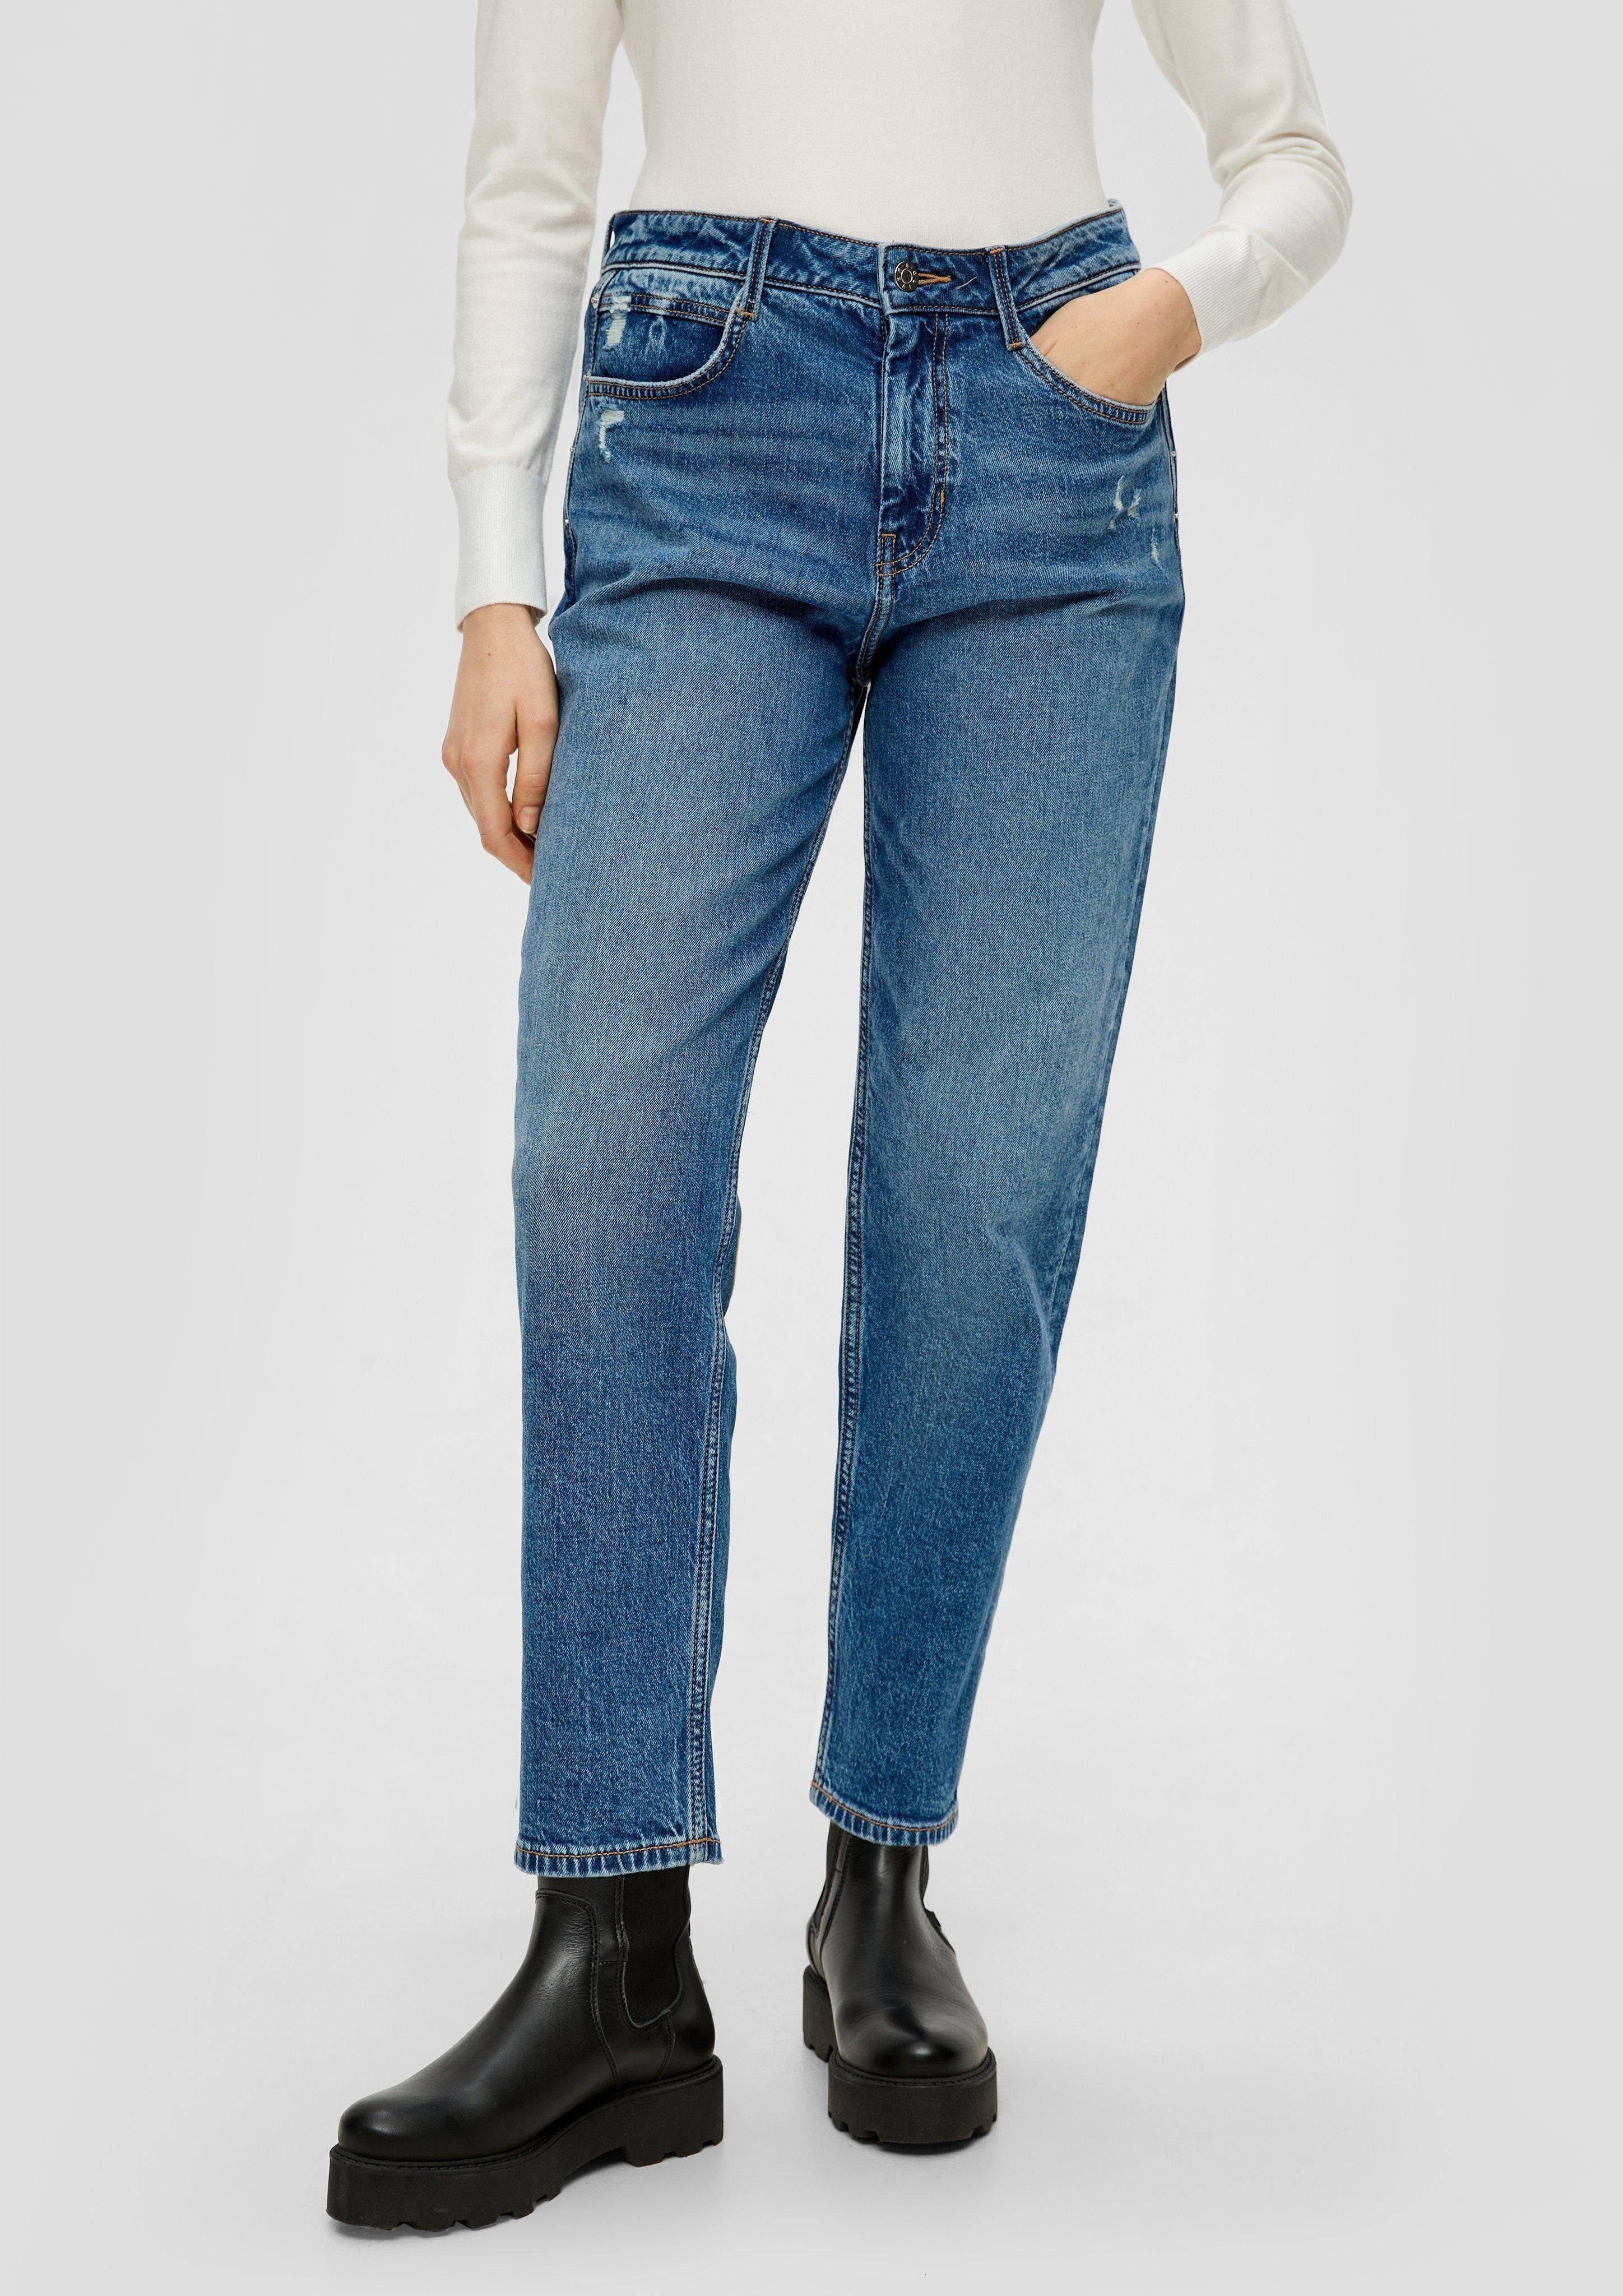 s.Oliver 7/8-Jeans Ankle-Jeans / Regular Fit / High Rise / Tapered Leg Label-Patch, Waschung, Nieten blau